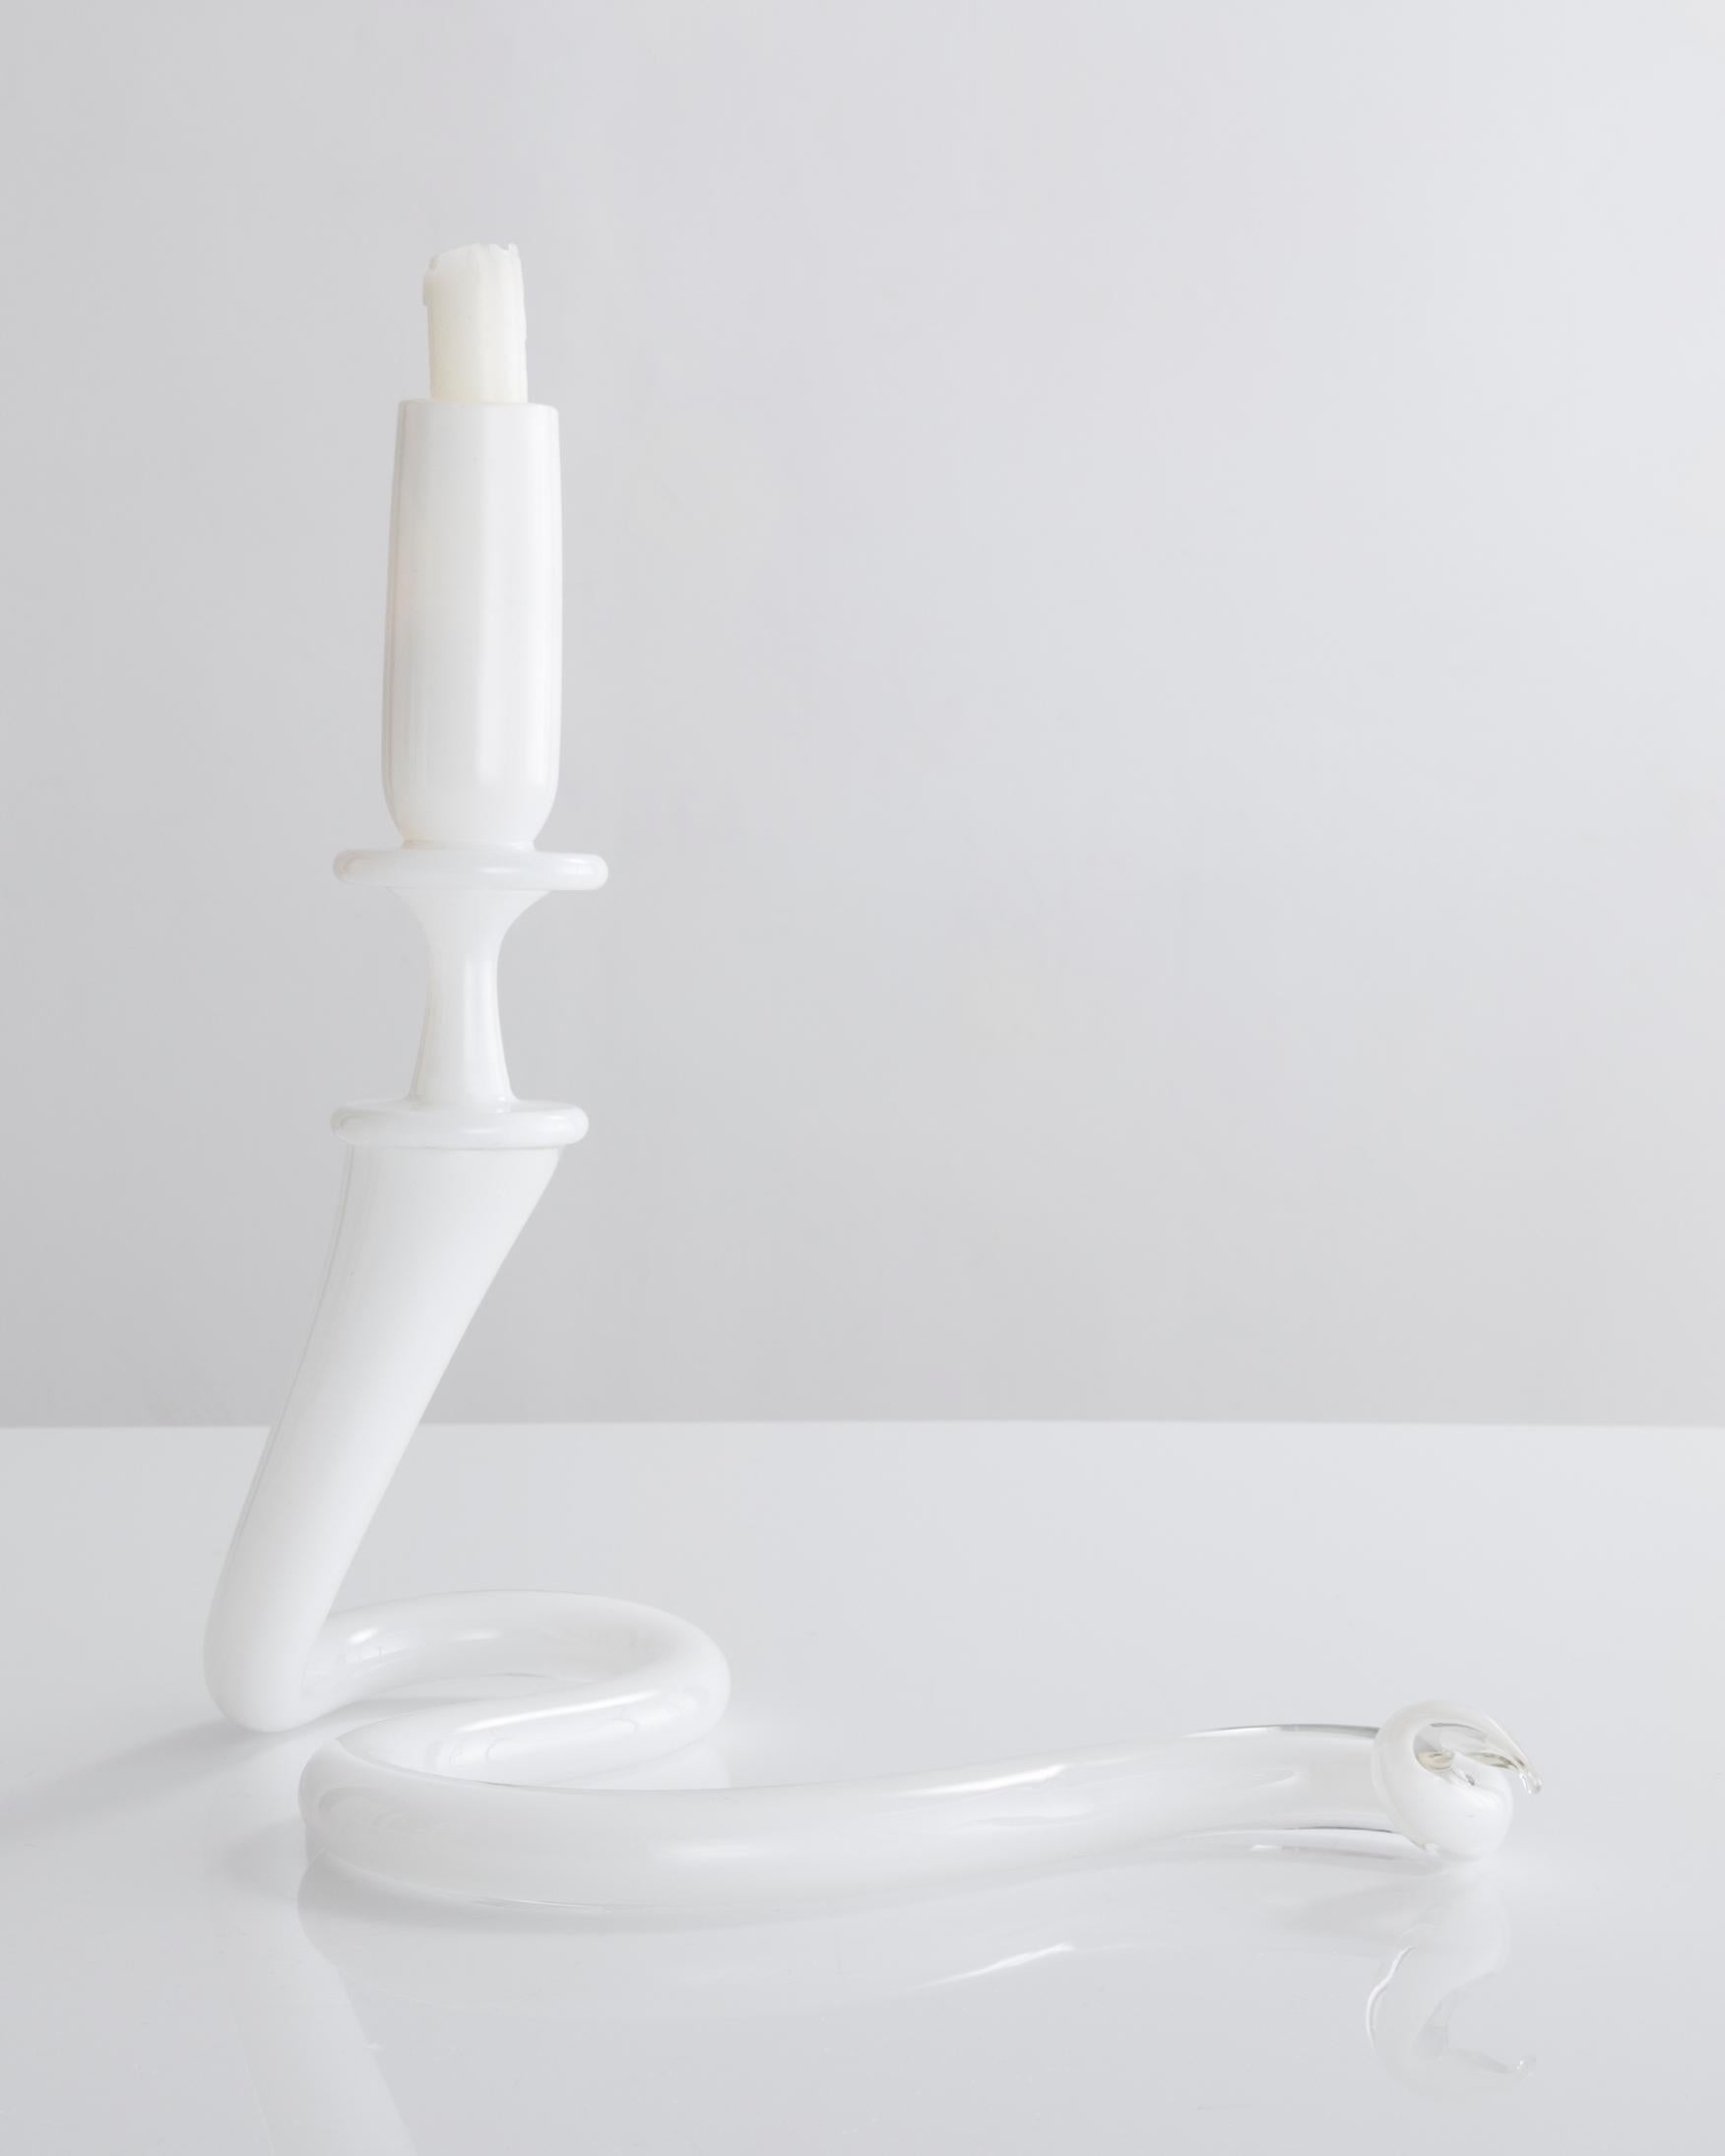 Unique single serpentine light sculpture in white hand blown glass. Designed and made by Jeff Zimmerman, USA, 2017.

Limited number available. Please note that each item may differ slightly in color and shape.